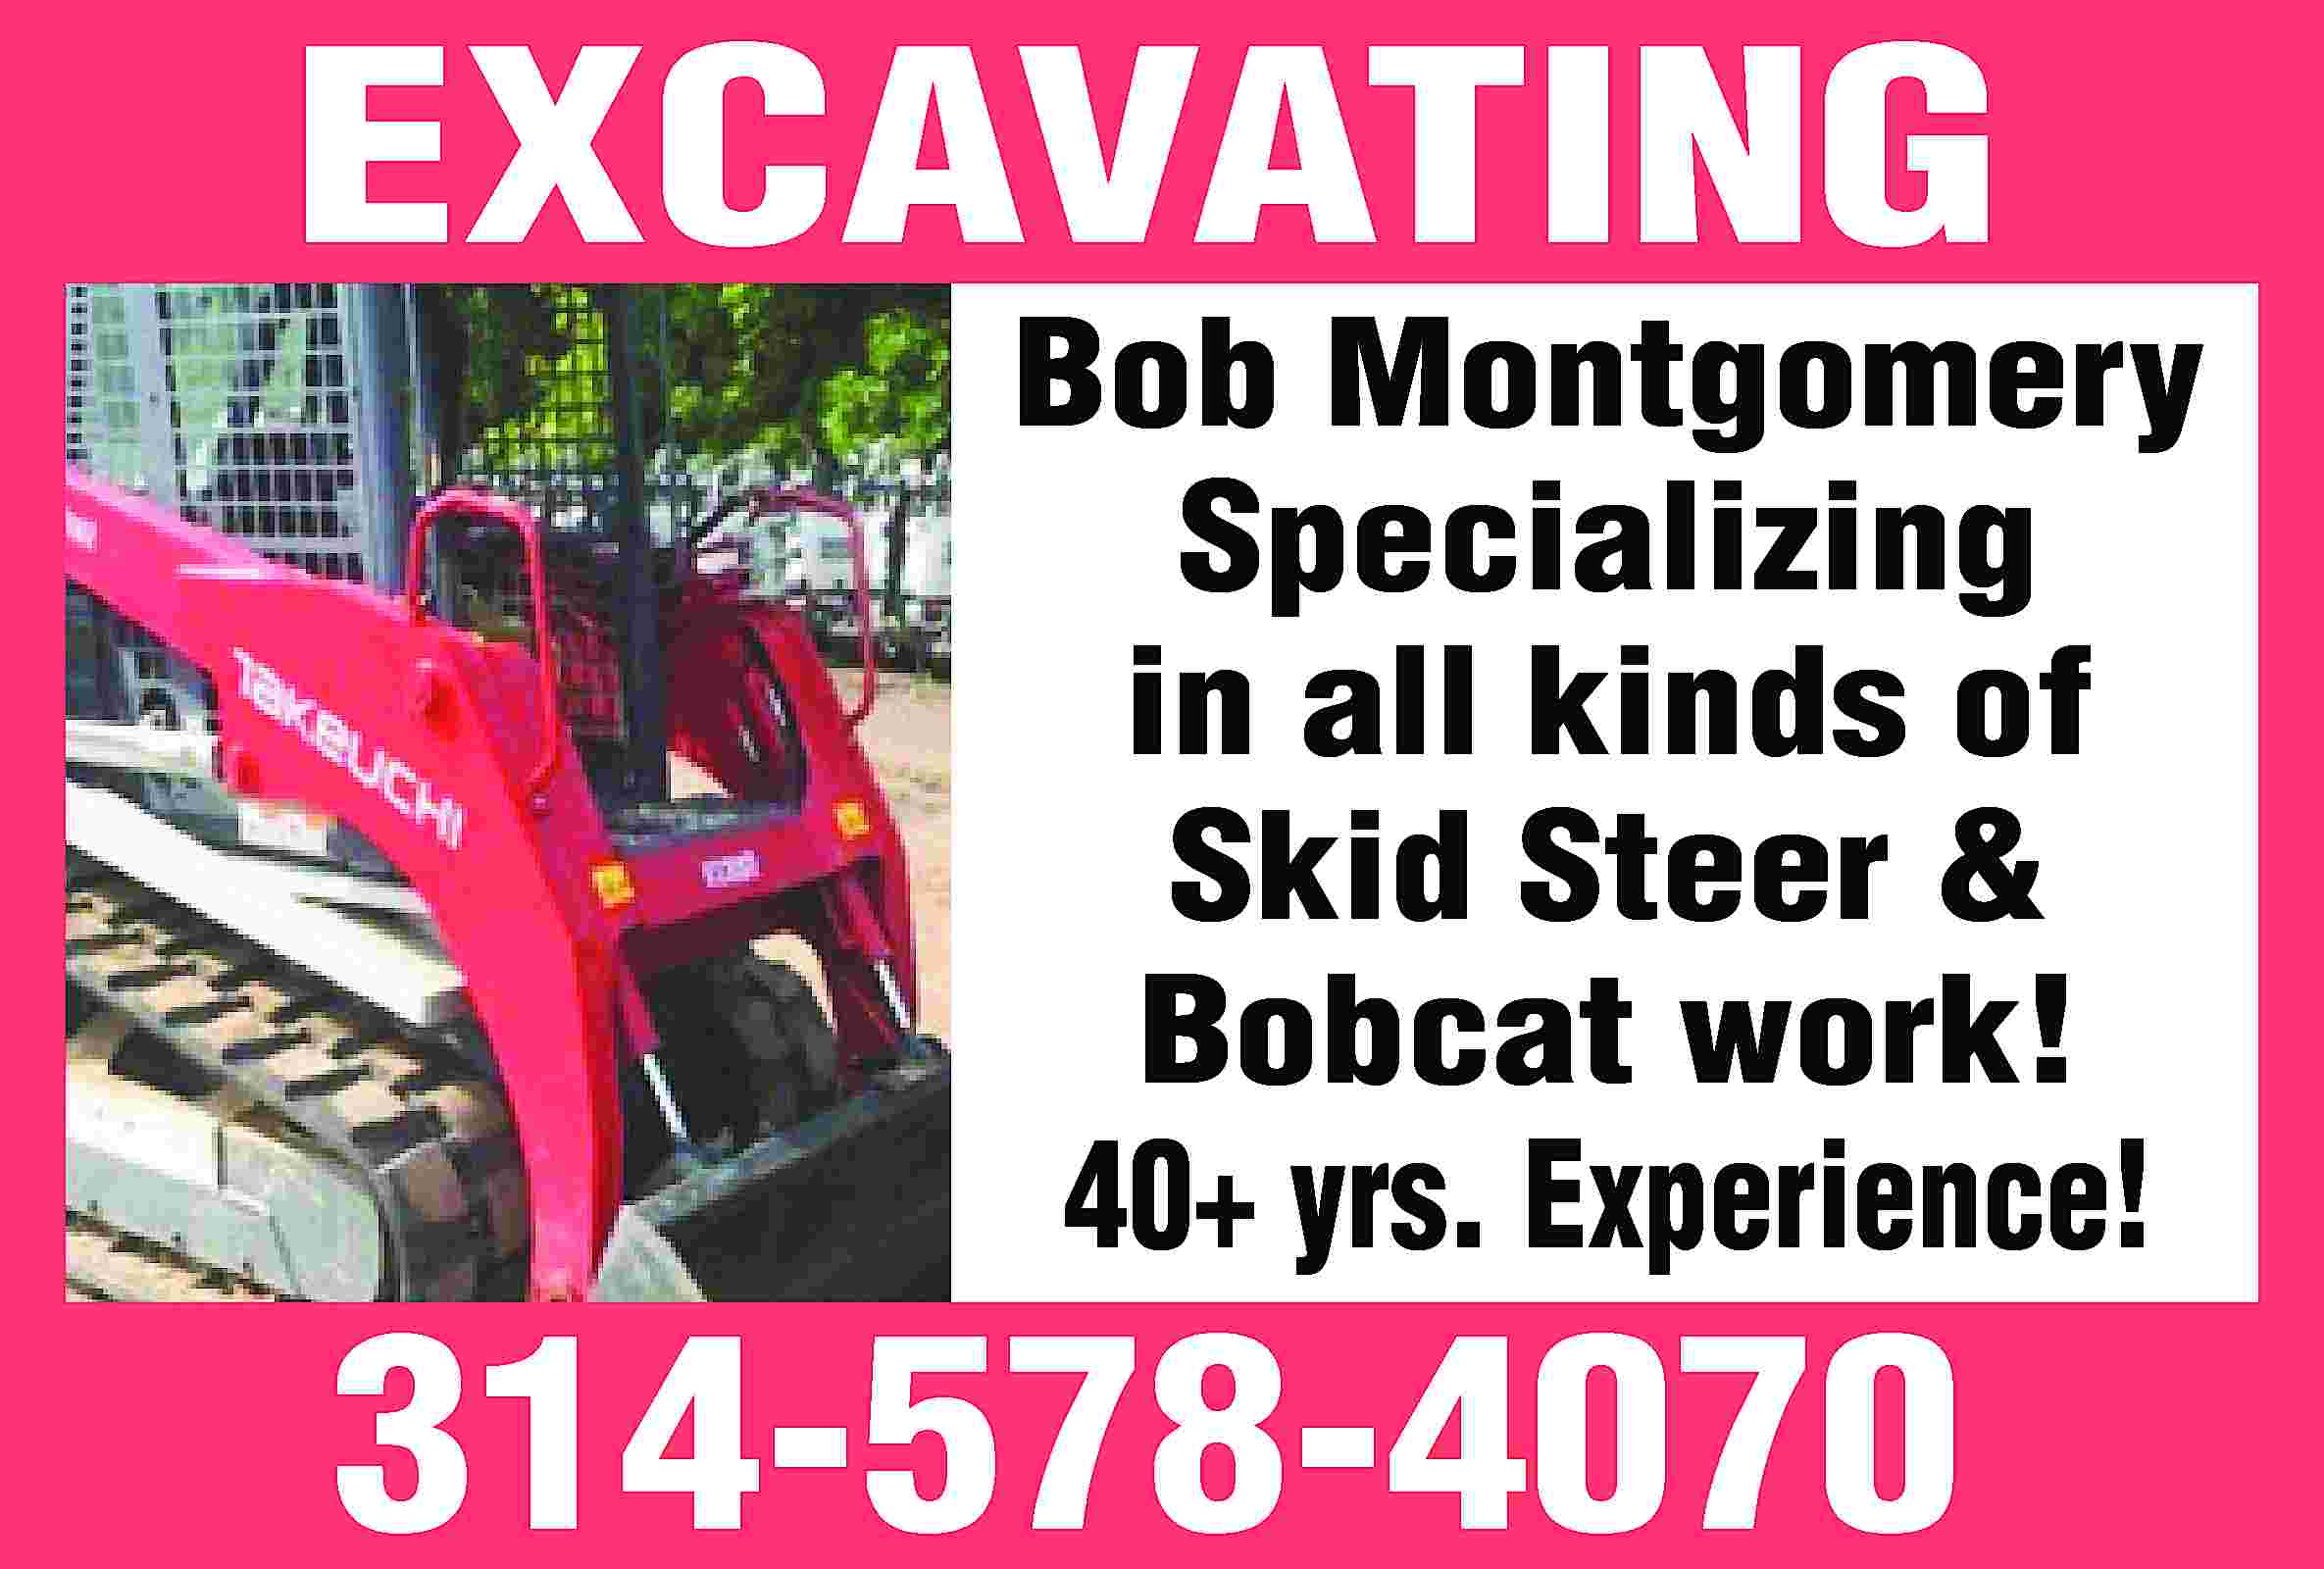 EXCAVATING Bob Montgomery Specializing in  EXCAVATING Bob Montgomery Specializing in all kinds of Skid Steer & Bobcat work! 40+ yrs. Experience! 314-578-4070